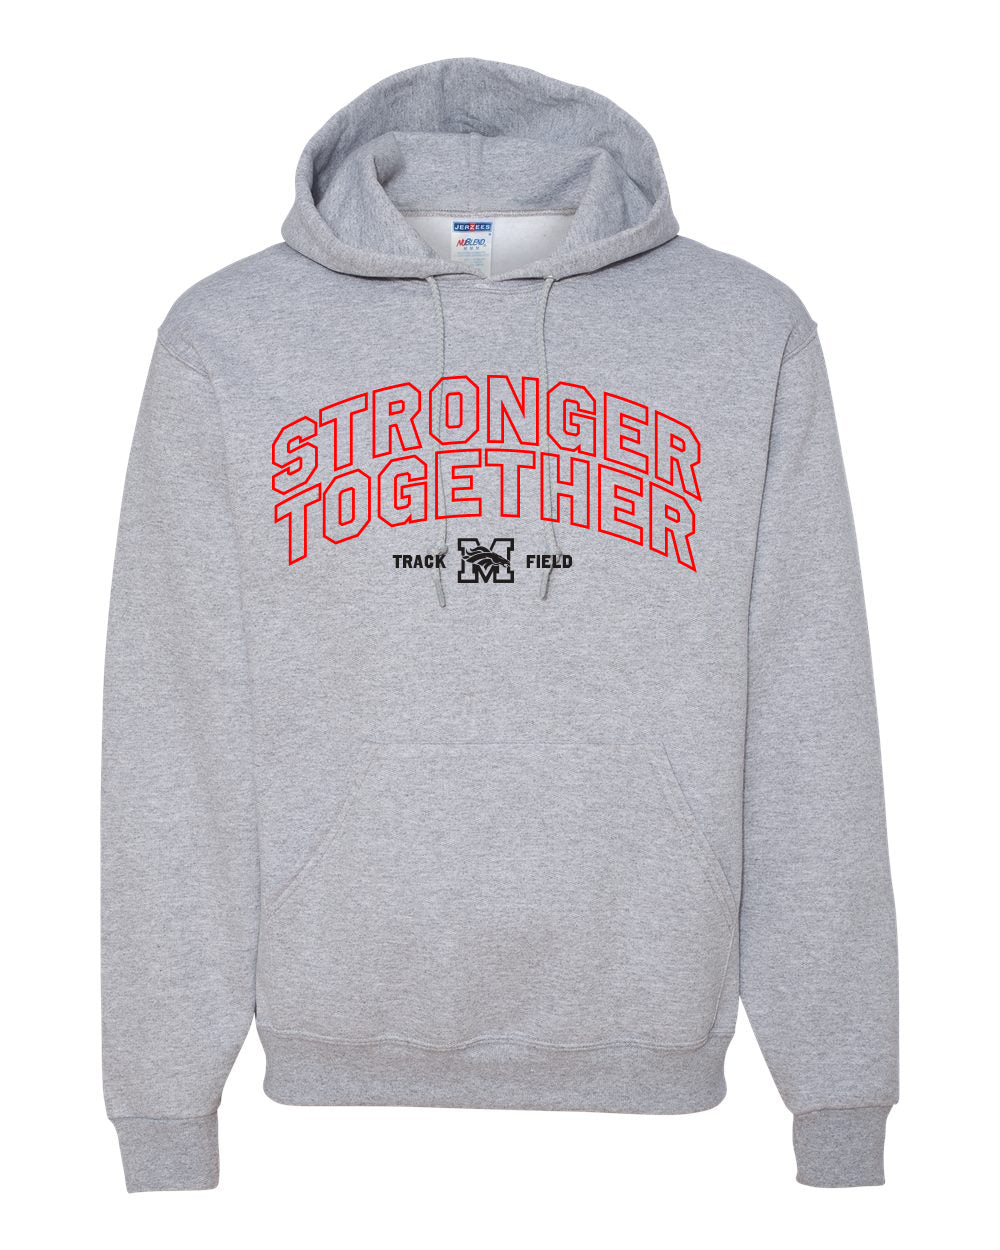 Stronger Together Hoodie - Mustang Track